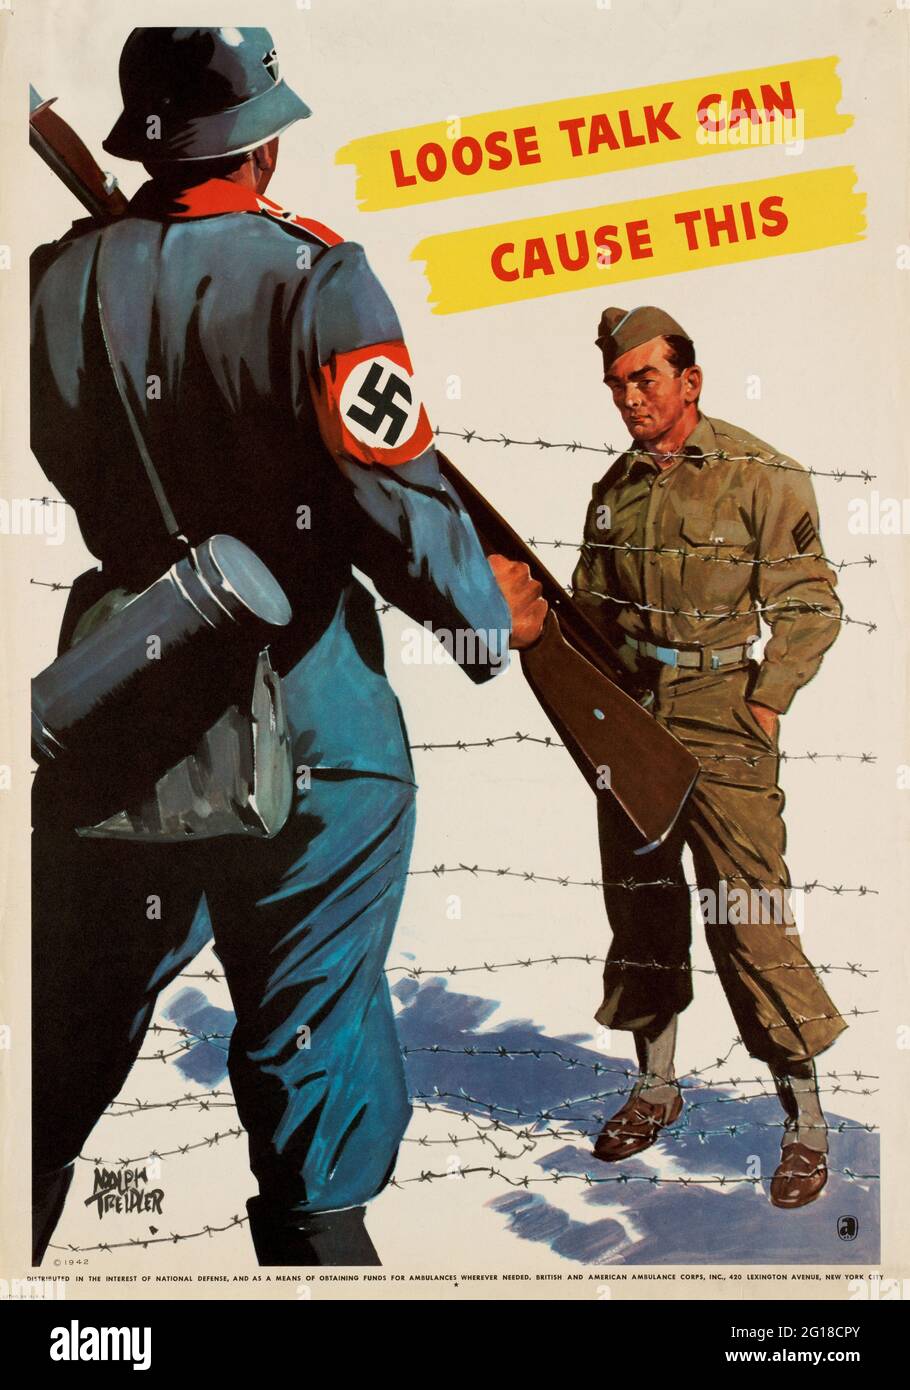 A vintage WW2 Allied poster raising awareness of careless talk costs lives, showing an Allied soldier behind barbed wire Stock Photo